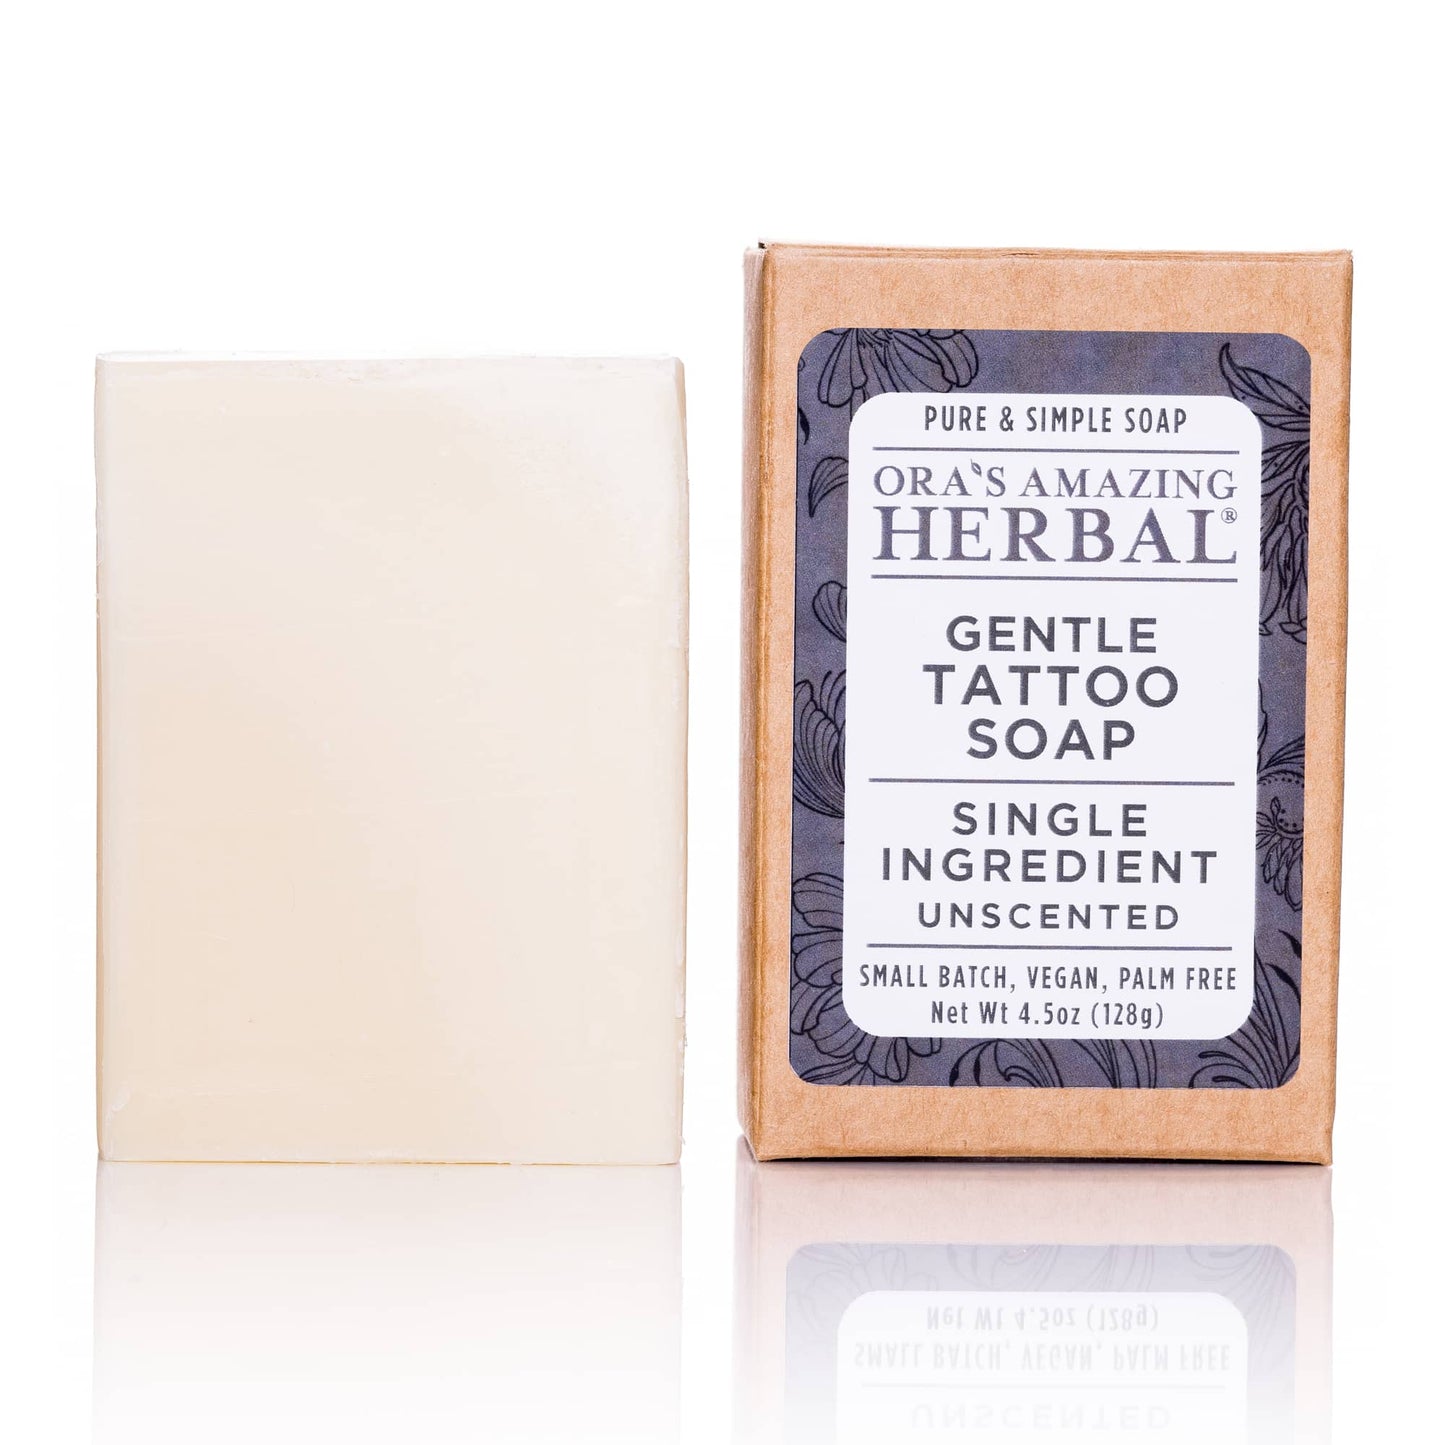 Tattoo Soap, Unscented